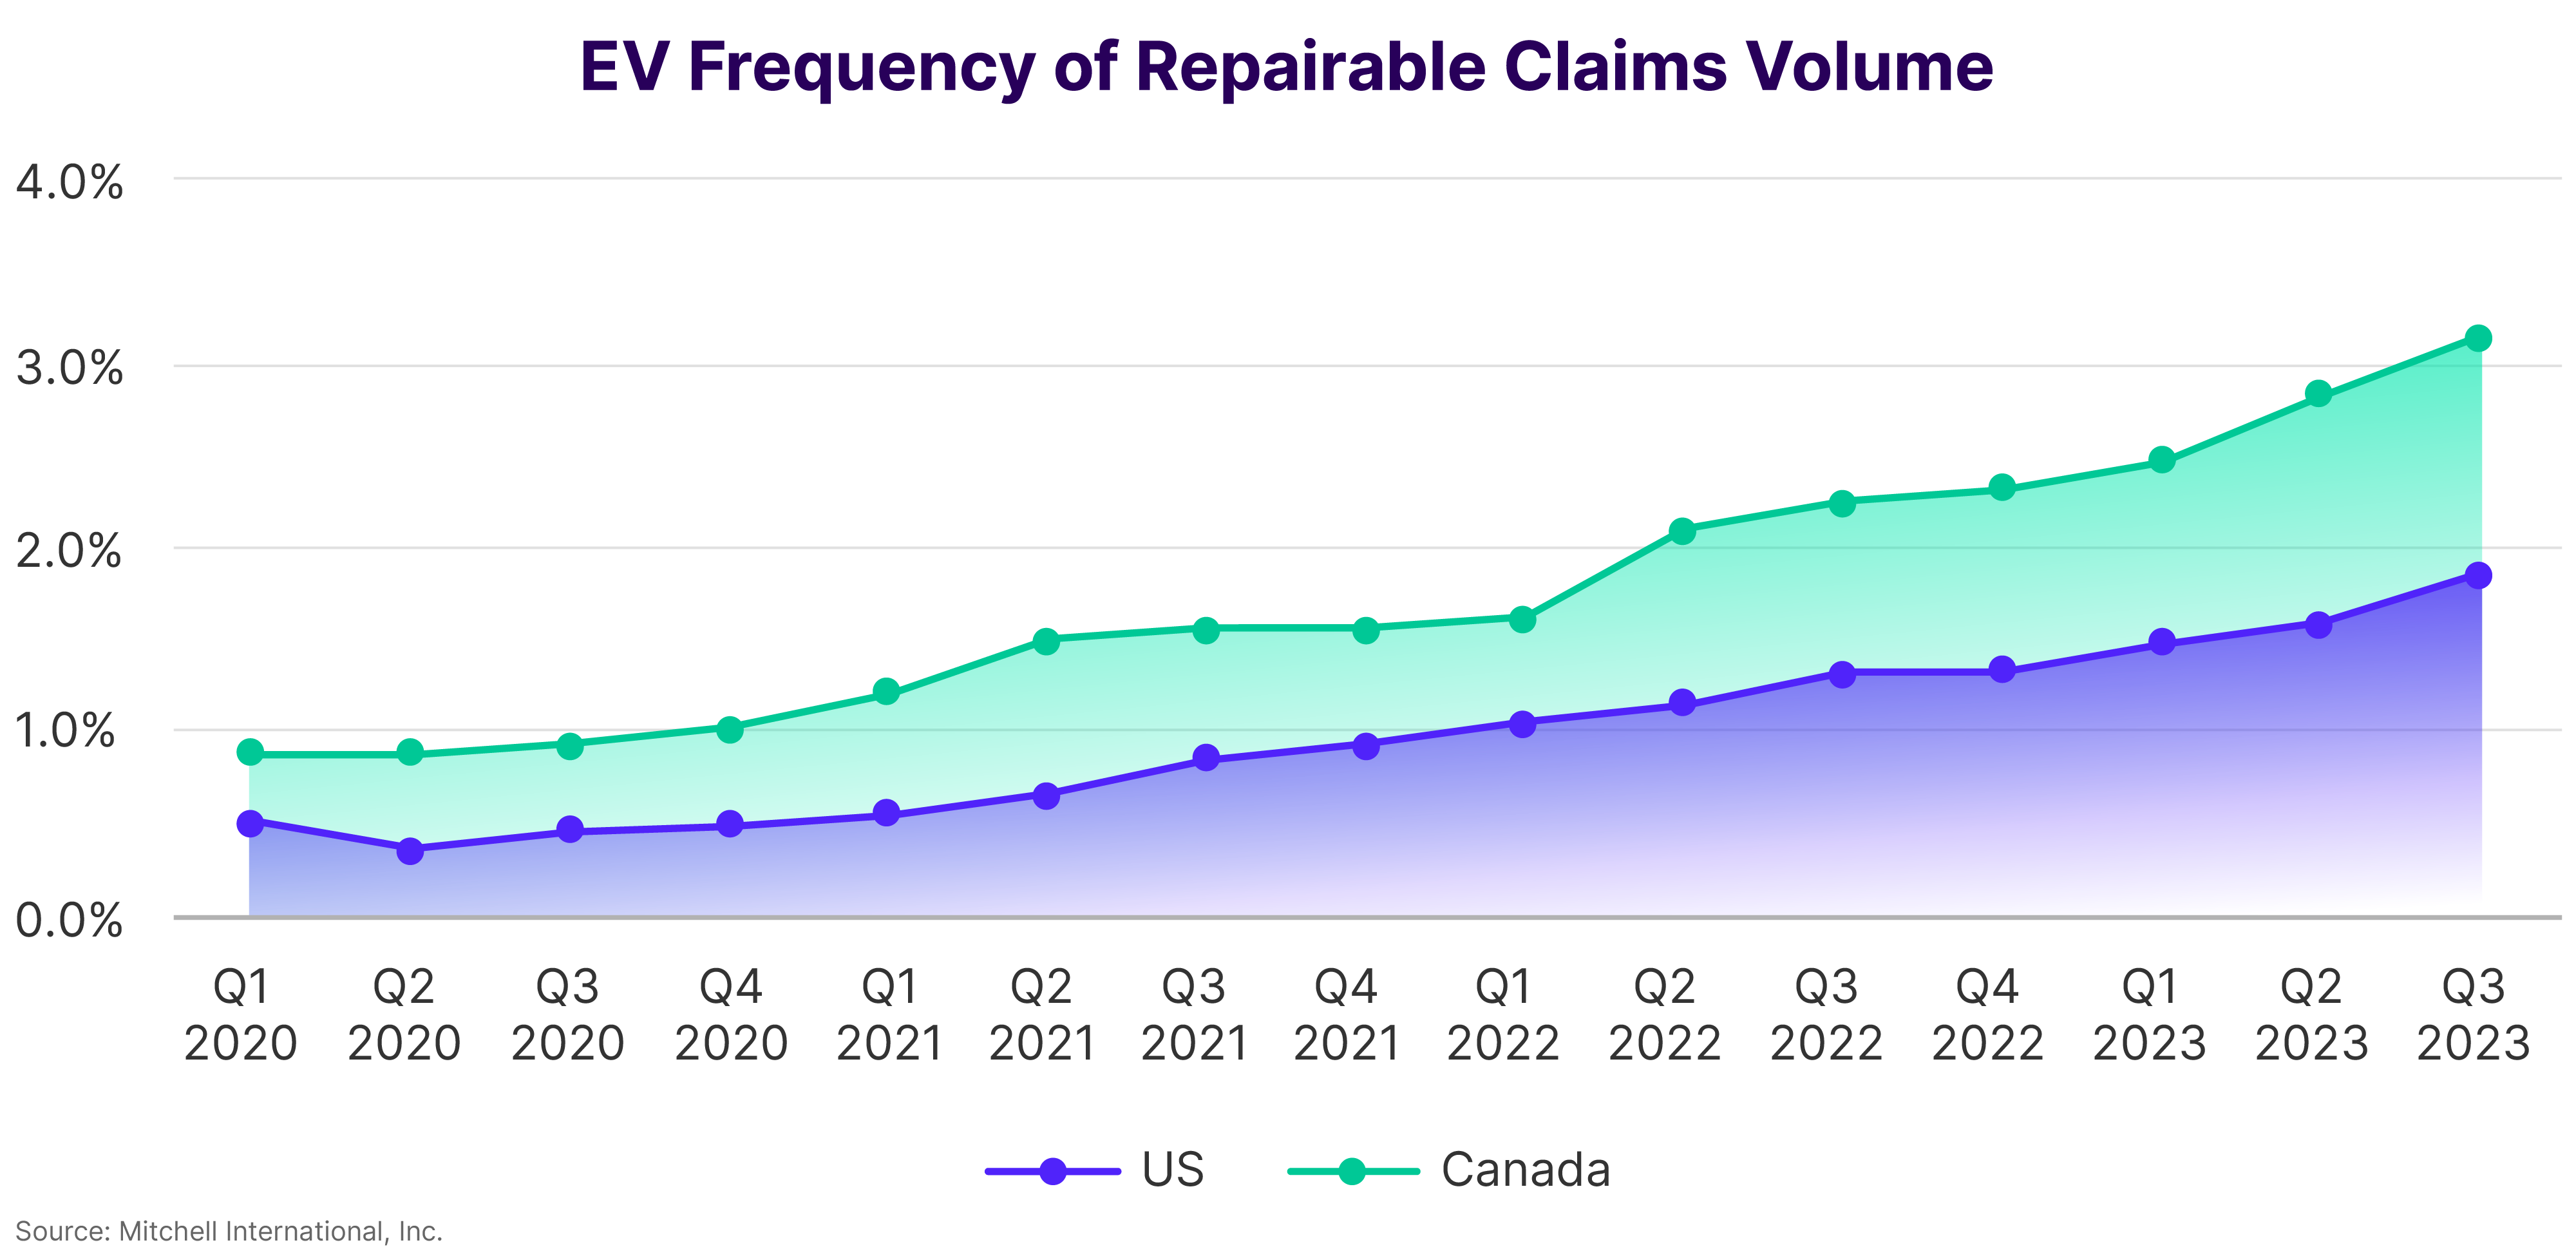 EV Frequency of Repairable Claims Volume Q3 2023